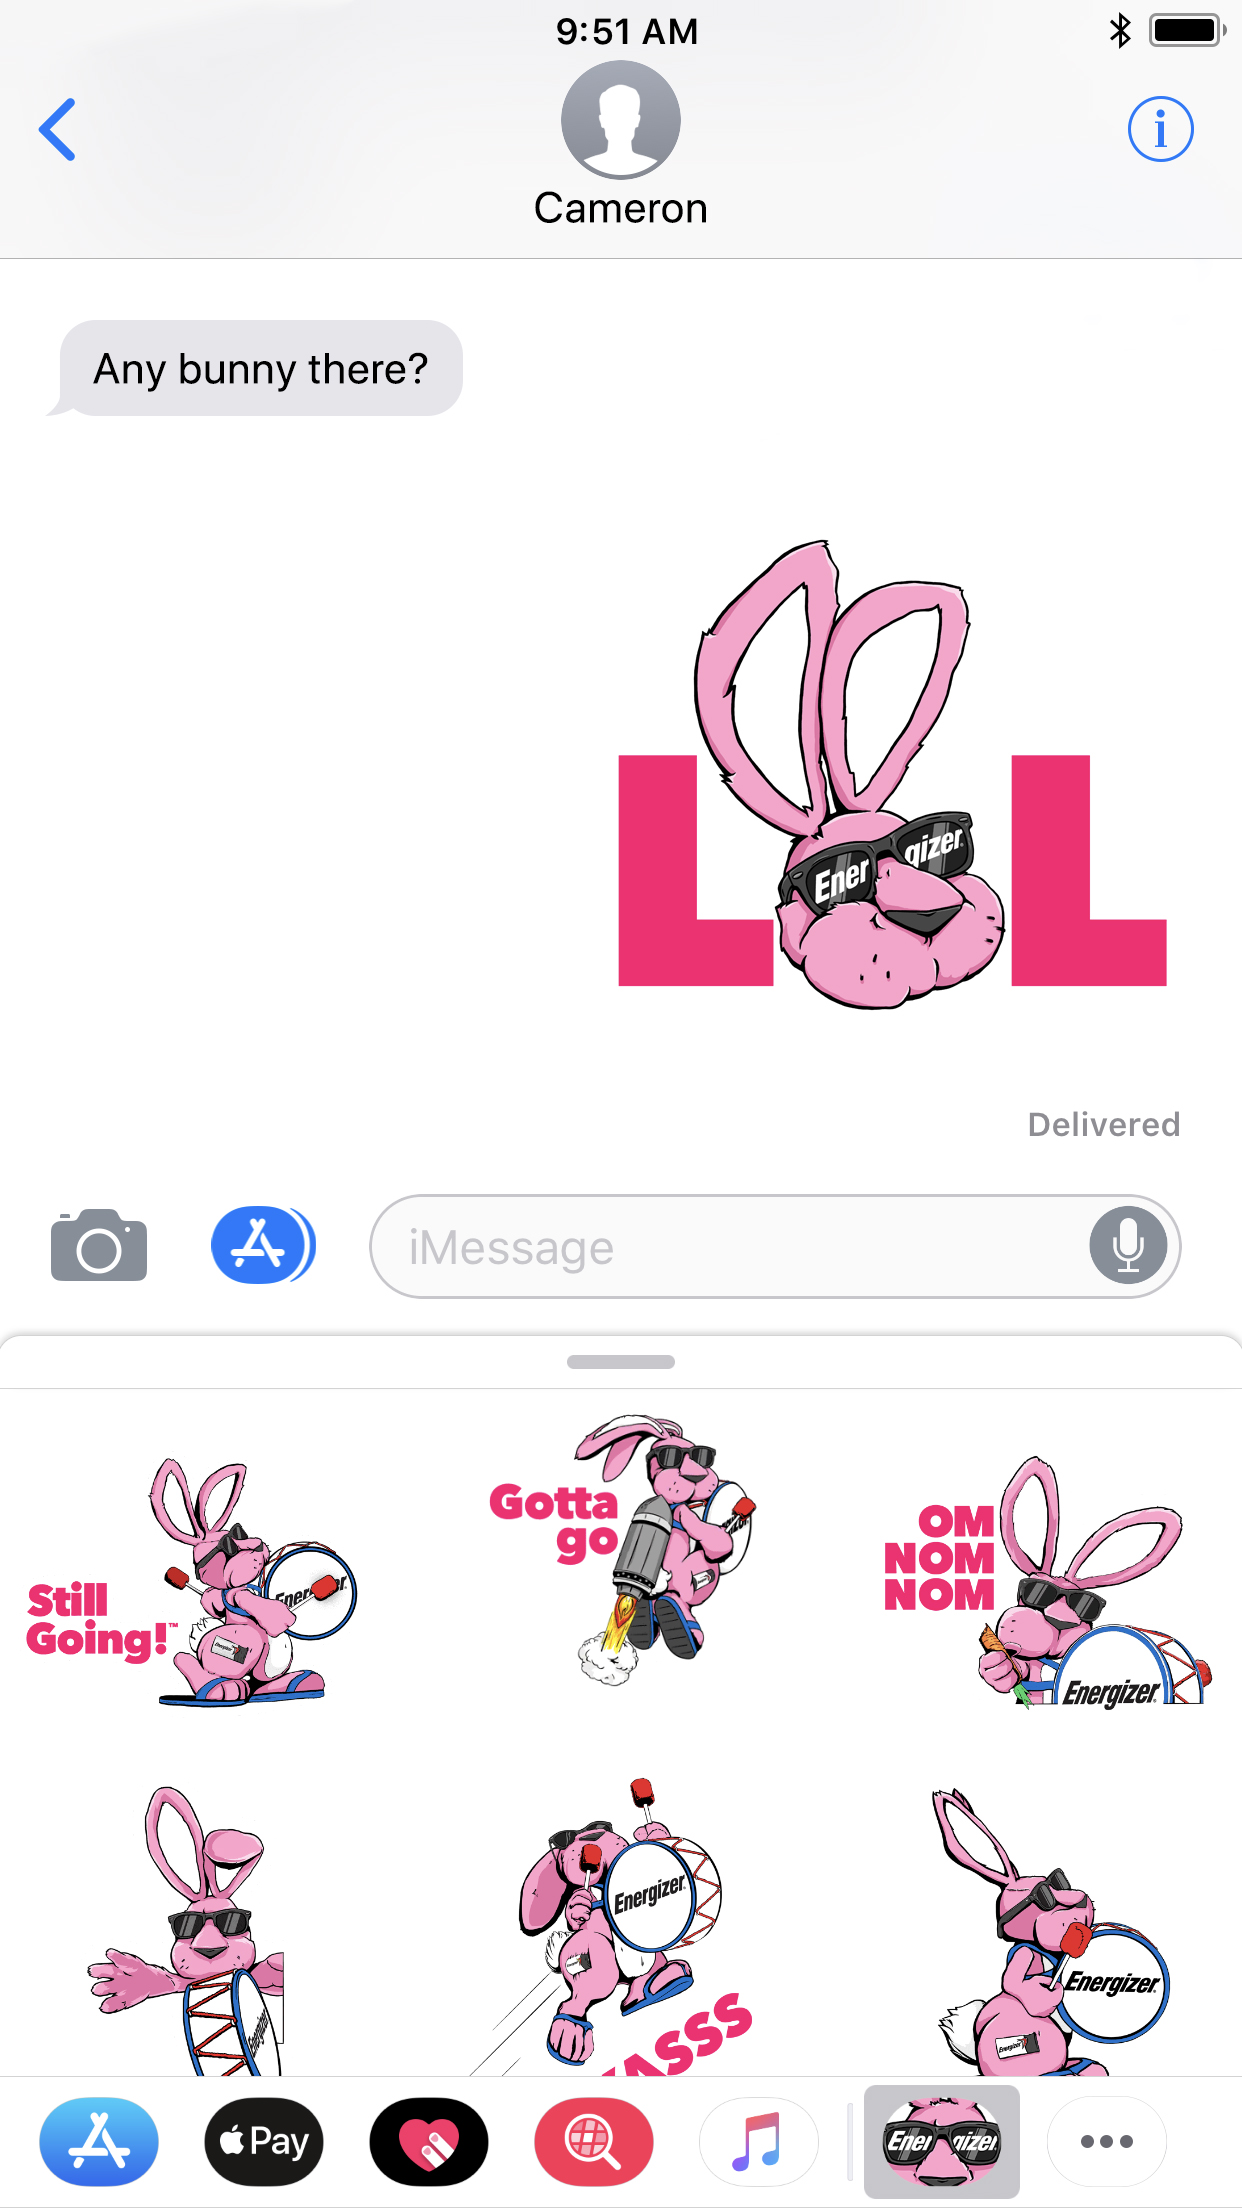 The Energizer Bunny™ is making his way into millions of text conversations with the Energizer®brand’s new 13 sticker iMessage pack.